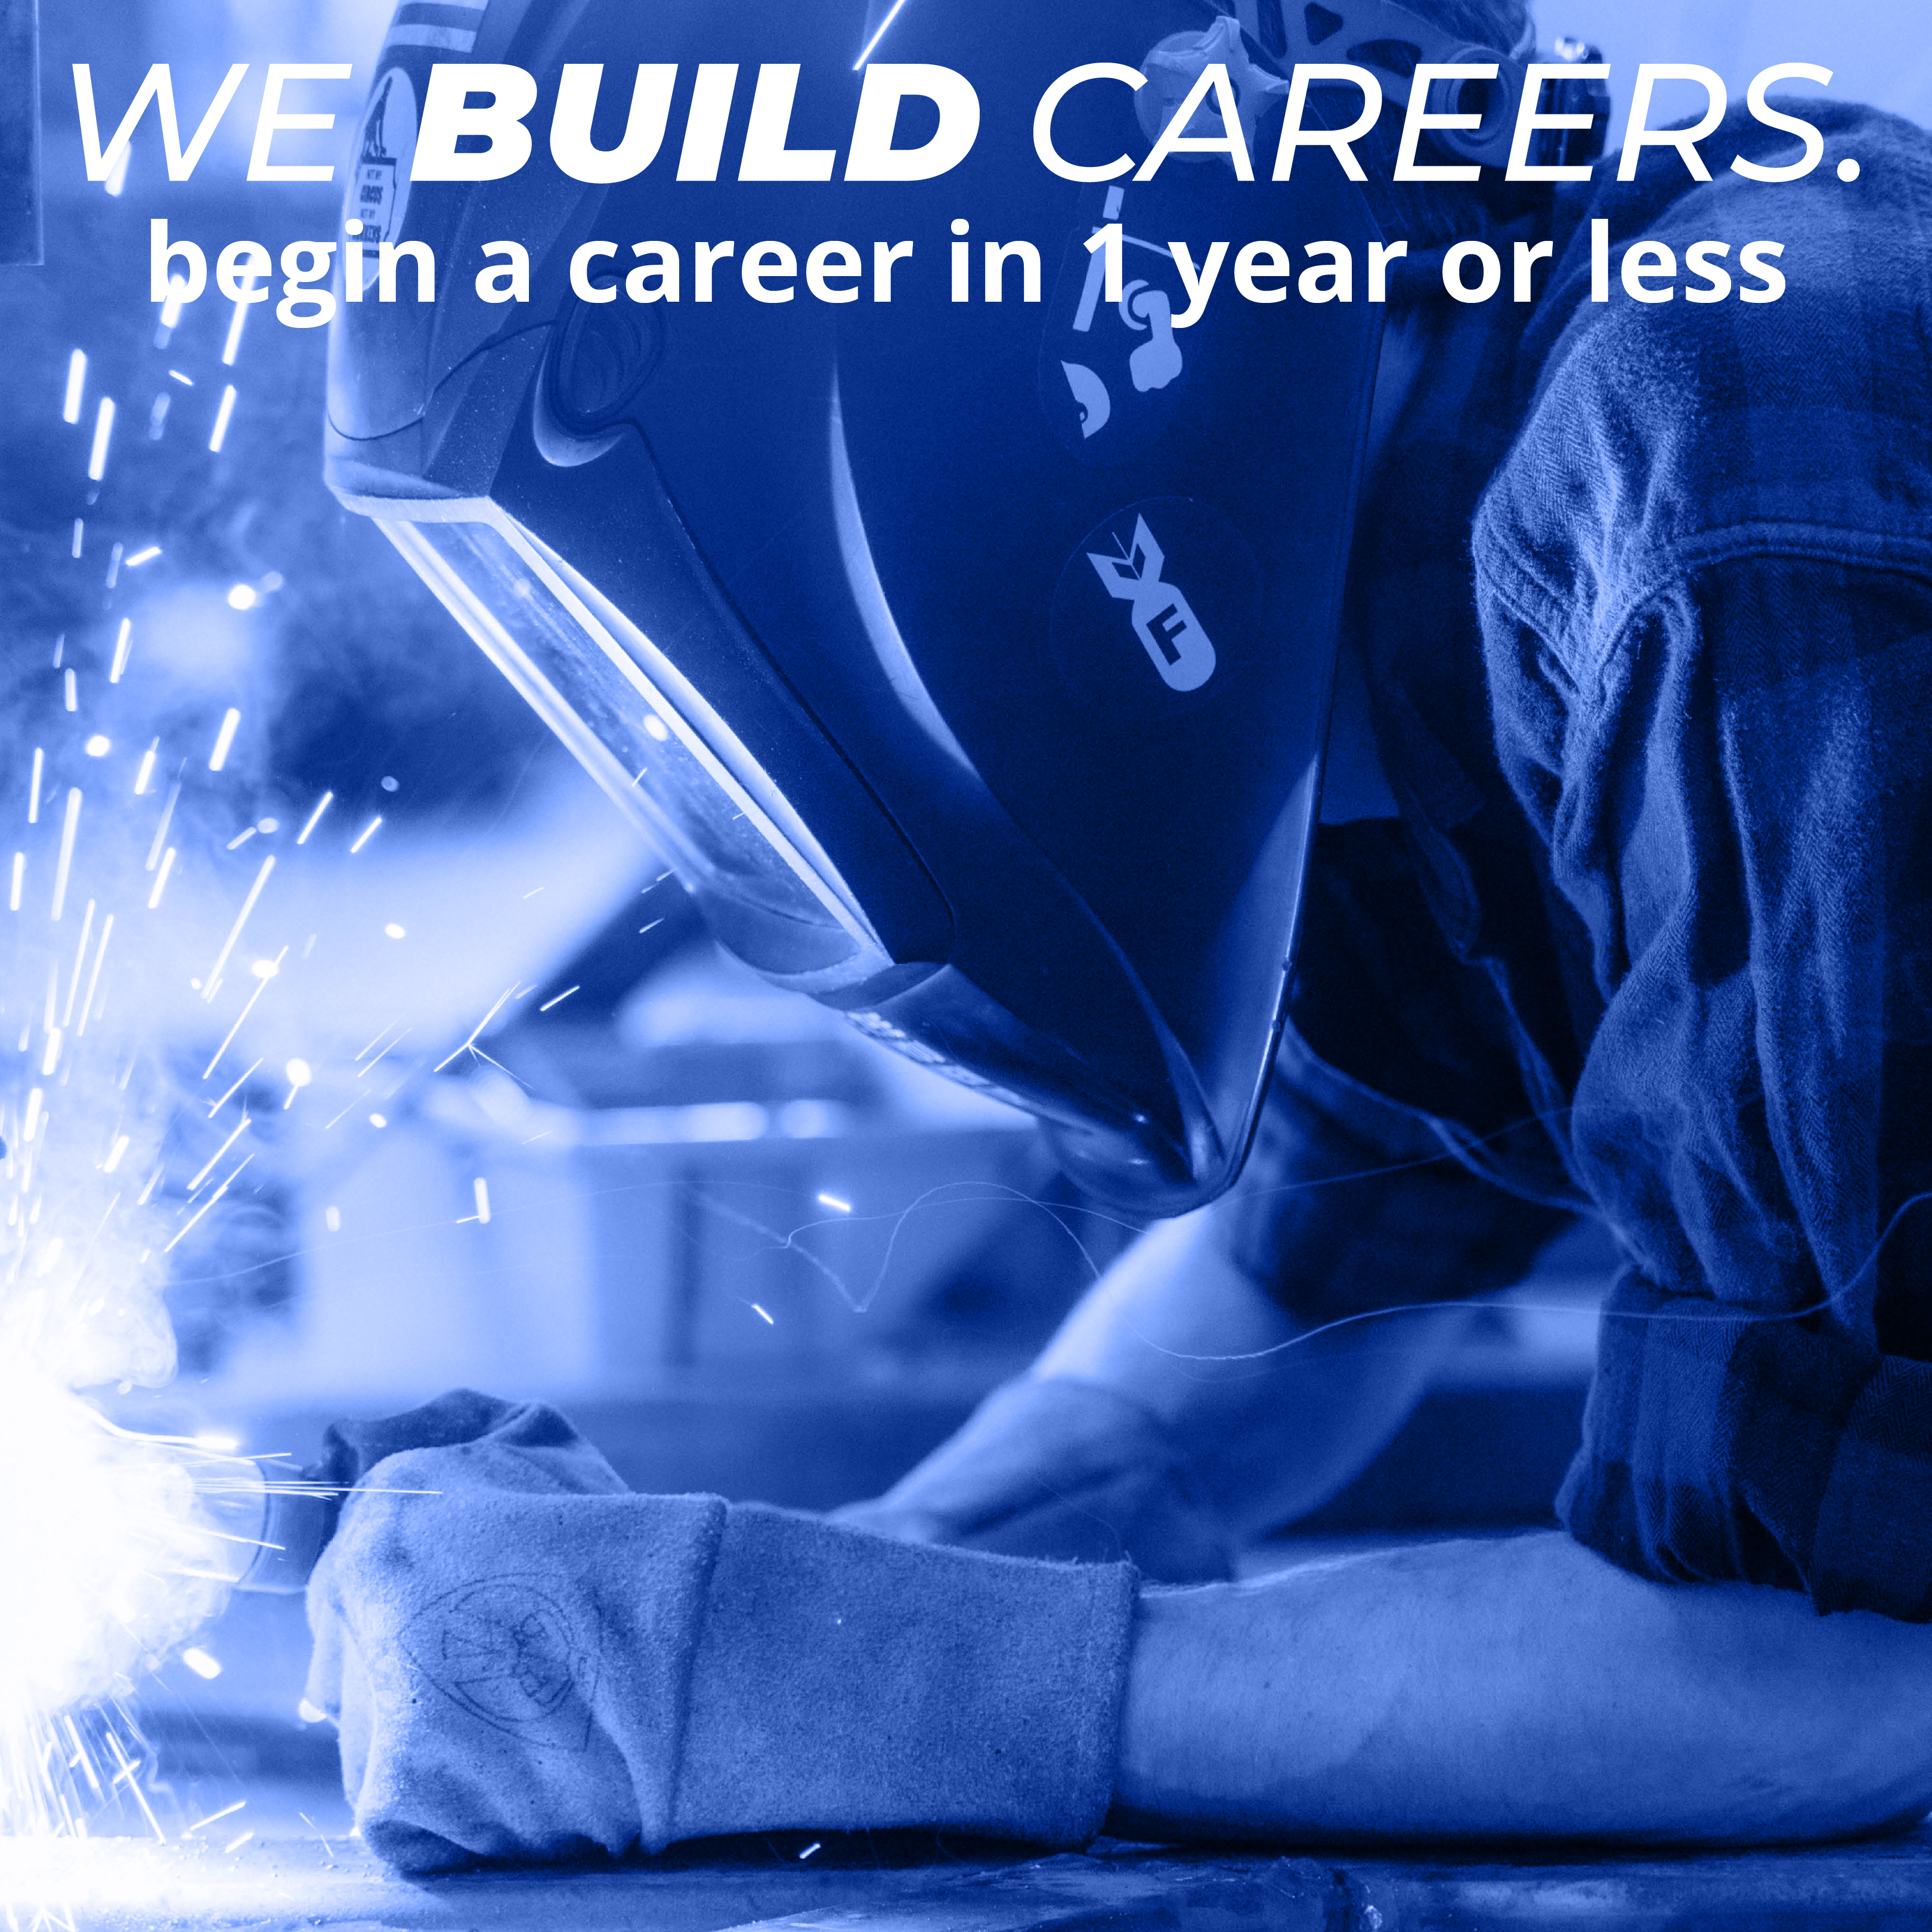 We build careers, begin a career in a year or less with TCAT at ChattState in white text on a blue background over a welder